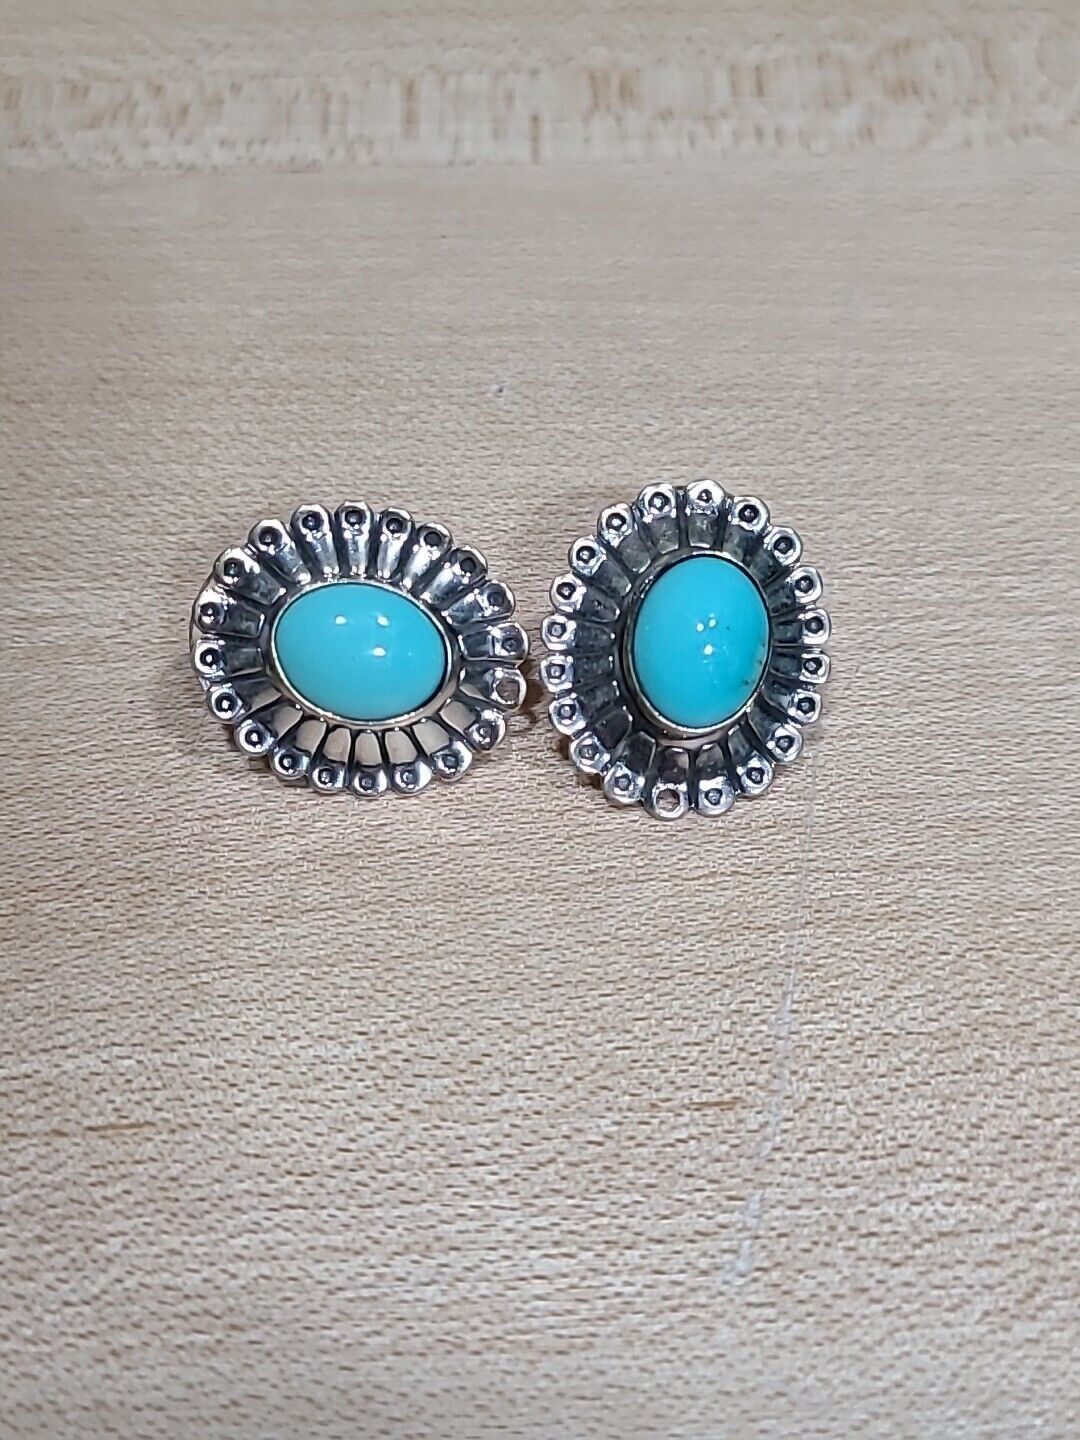 NAVAJO QT STERLING SILVER TURQUOISE EARRINGS Feather Flower Native American VTG 